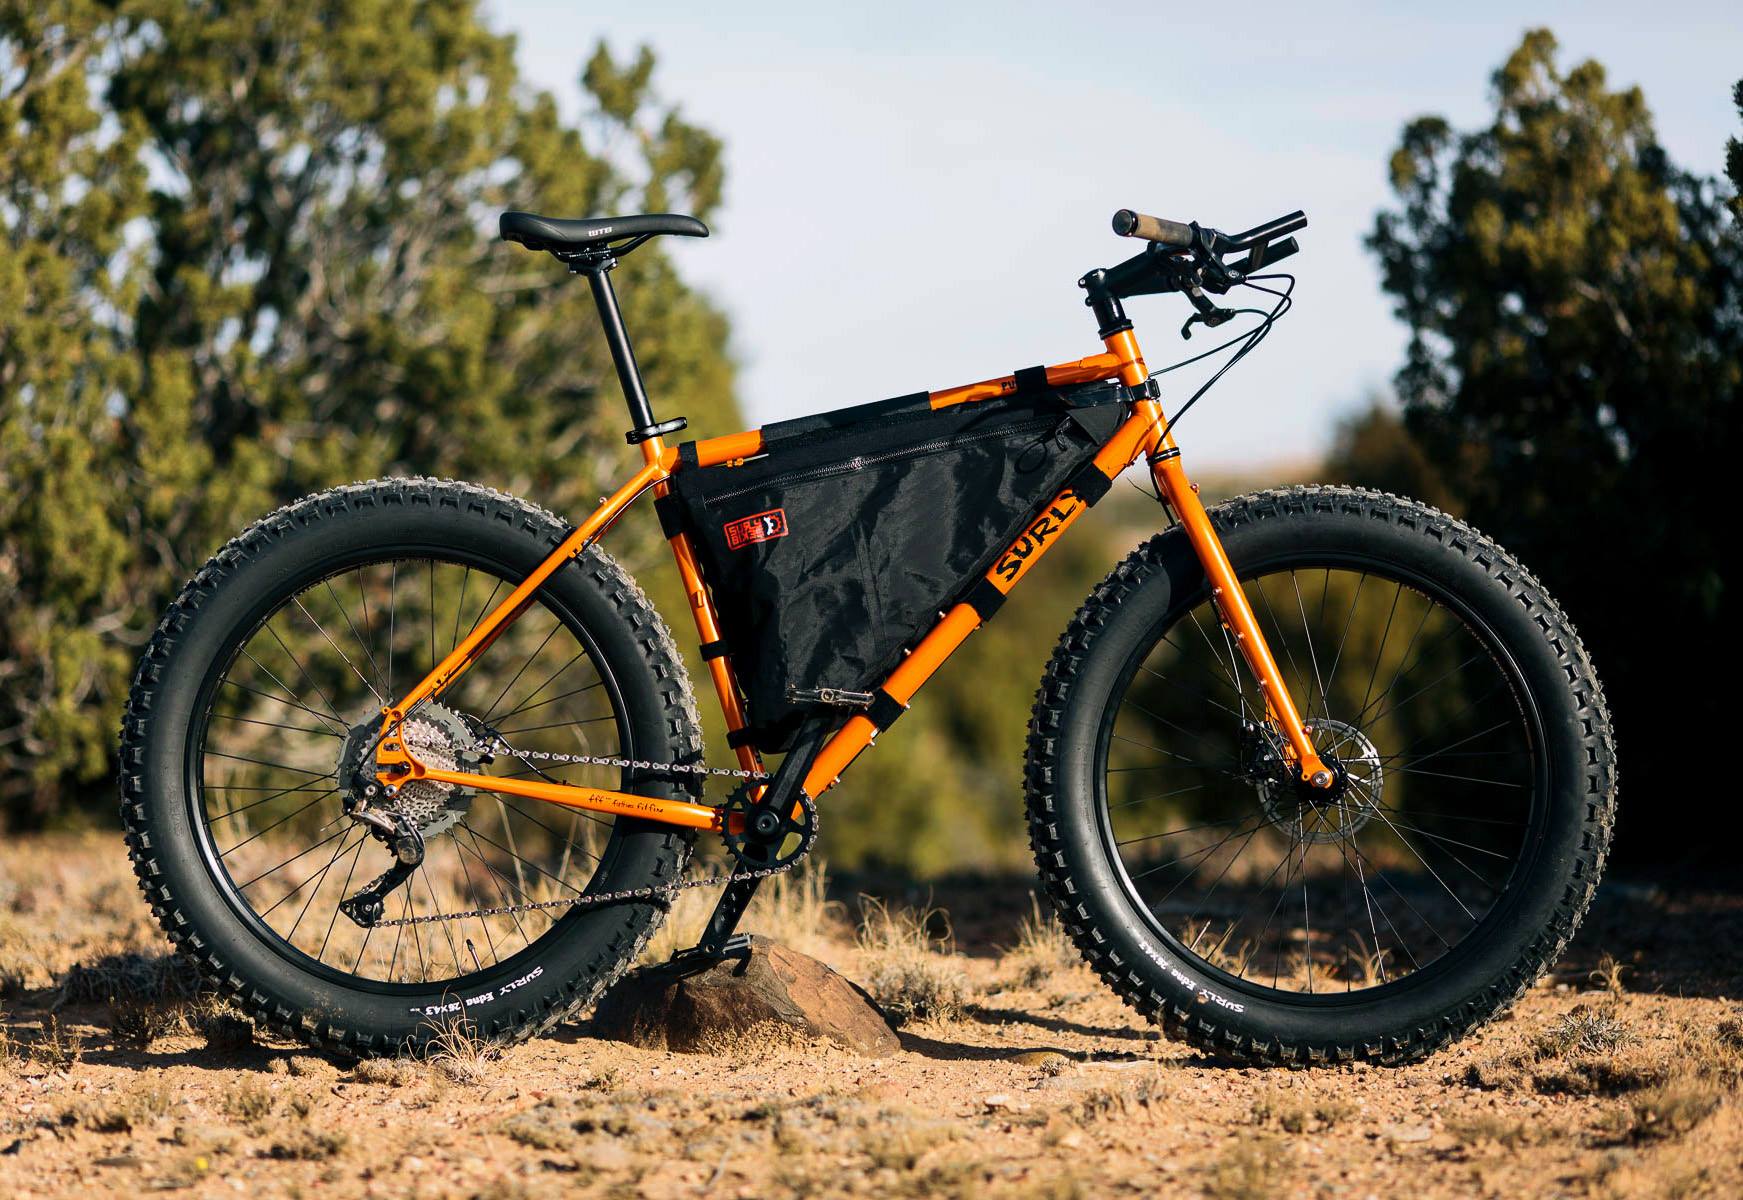 Surly Pugsley 2.0 returns as a complete touring fat bike with bigger